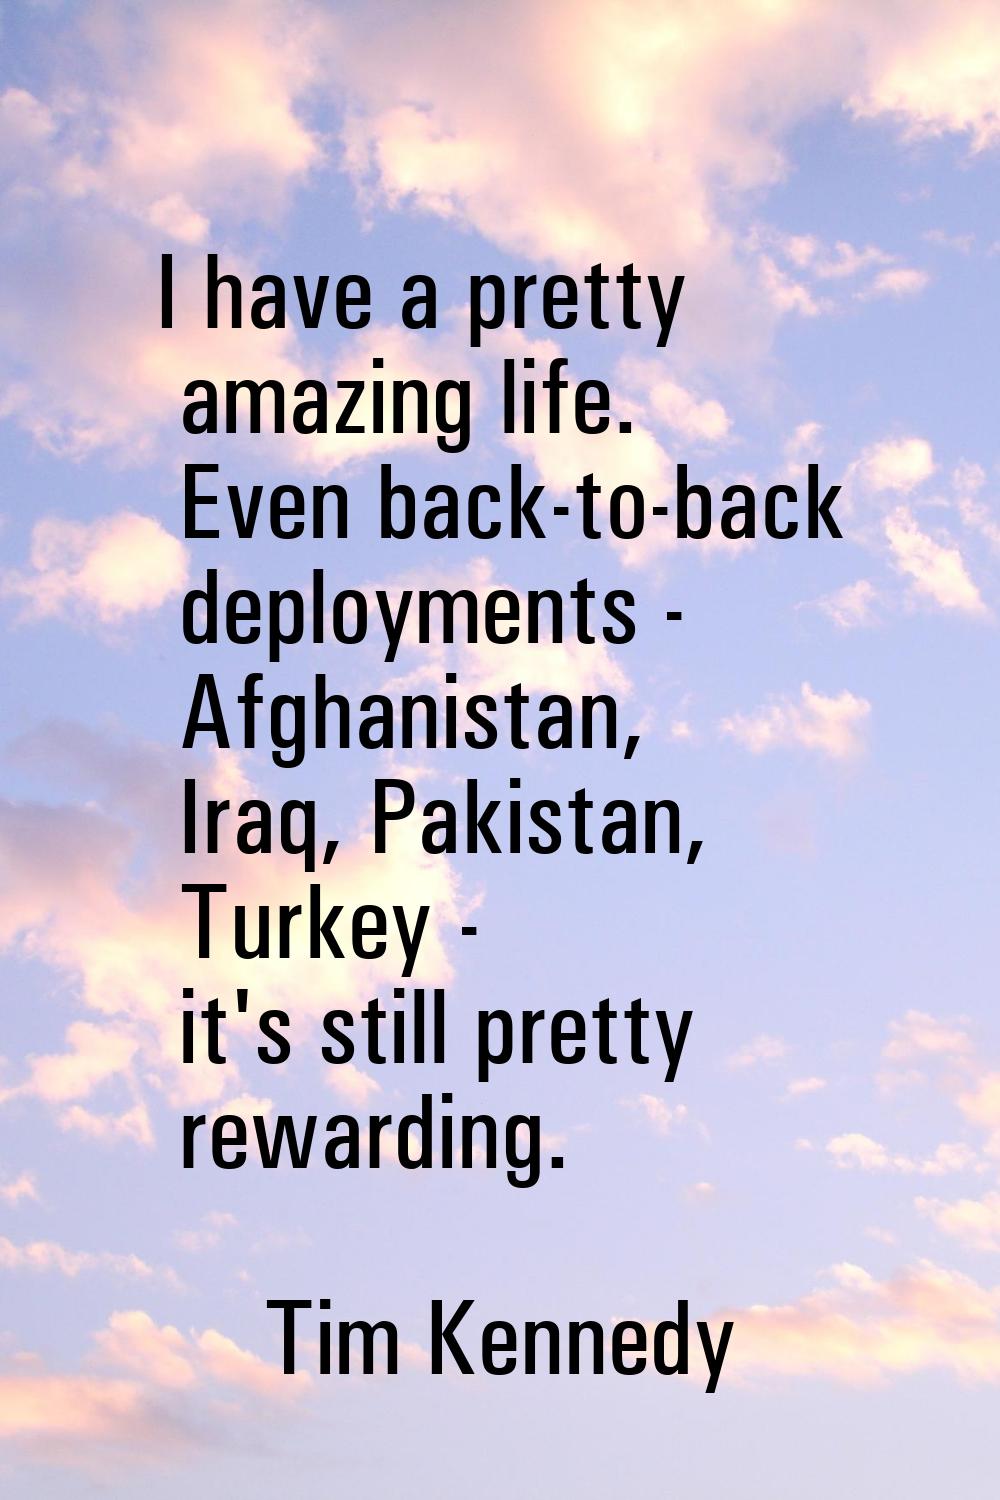 I have a pretty amazing life. Even back-to-back deployments - Afghanistan, Iraq, Pakistan, Turkey -